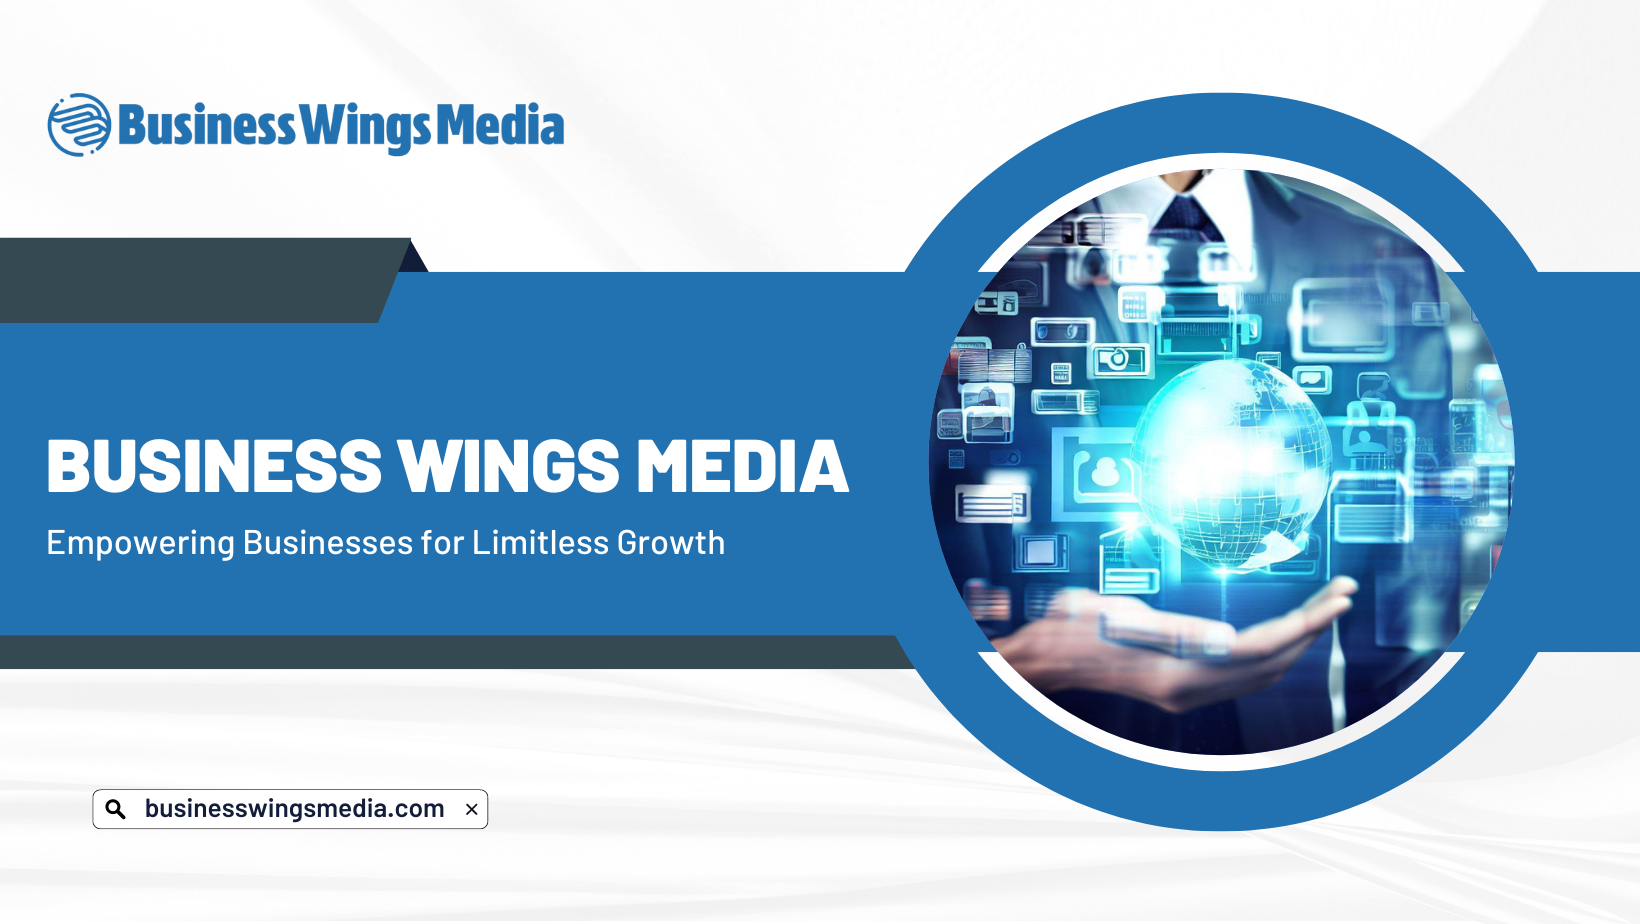 Business Wings Media - Empowering Businesses for Limitless Growth